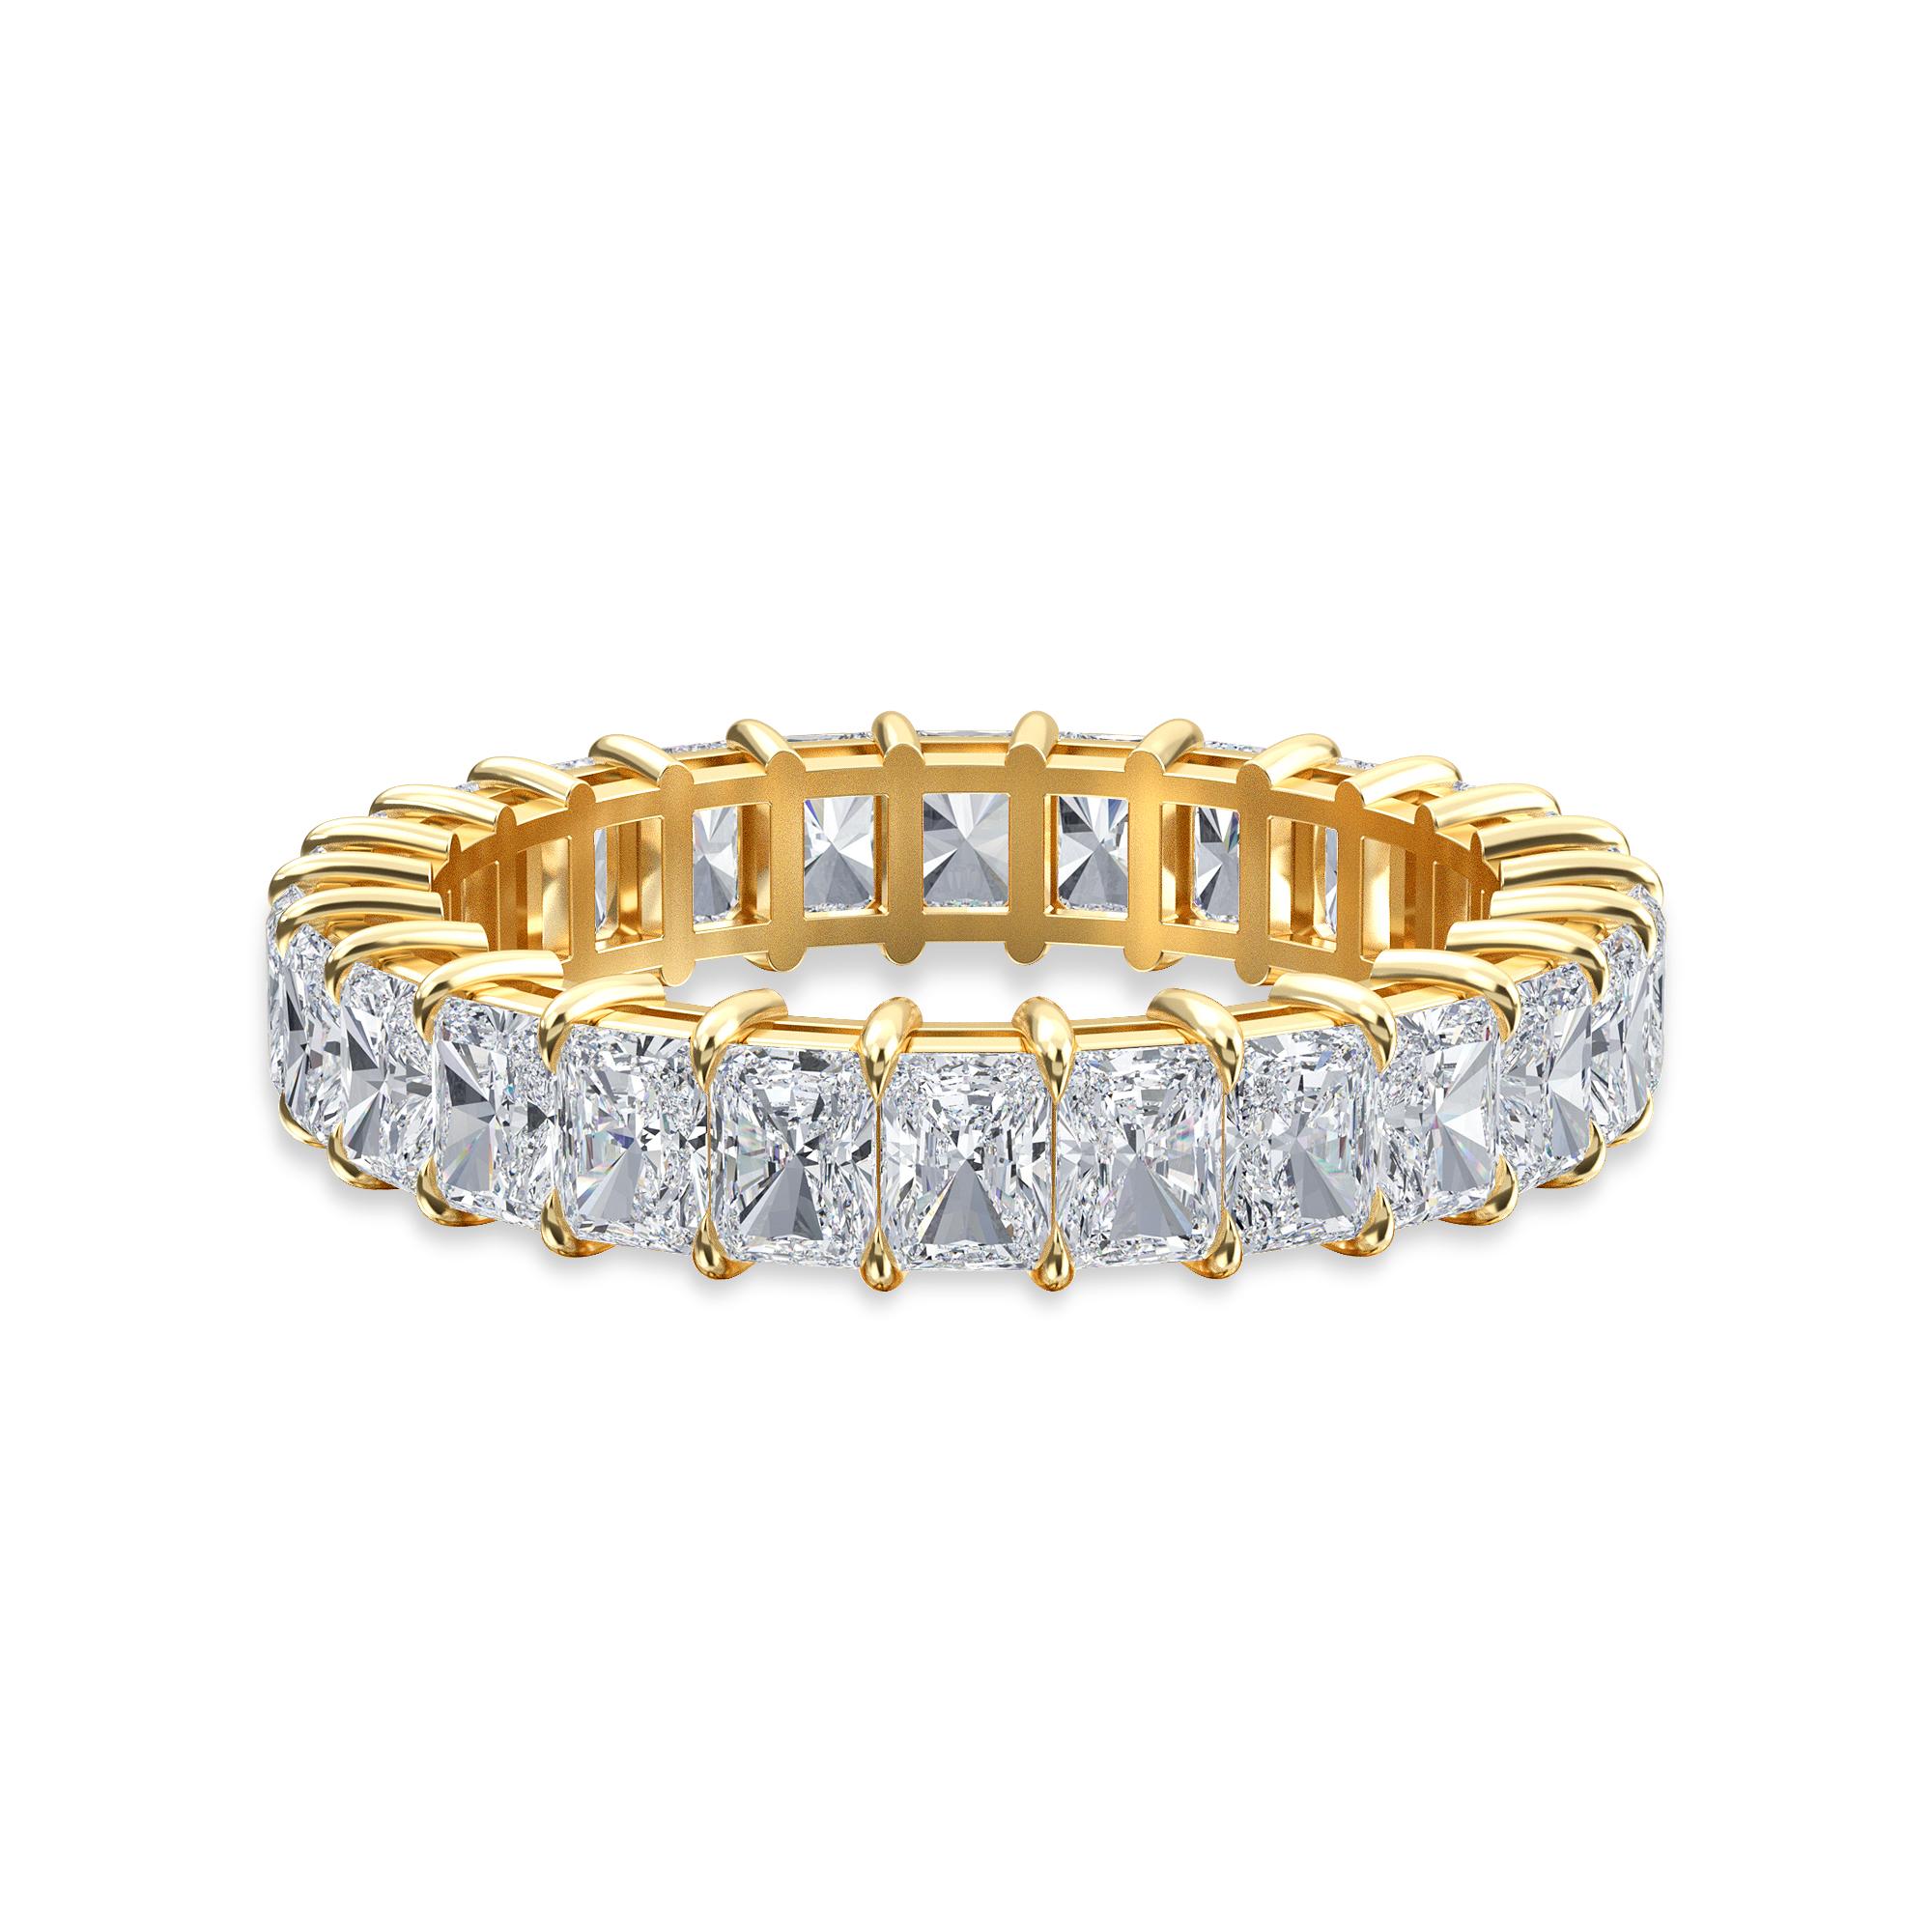 This Radiant Diamond Eternity Band has 26 diamonds and a Total Carat Weight of 2.75.
The Diamonds are F Color, VS Clarity. The Ring is a finger size 6.25 and is set in 18K Yellow Gold.
